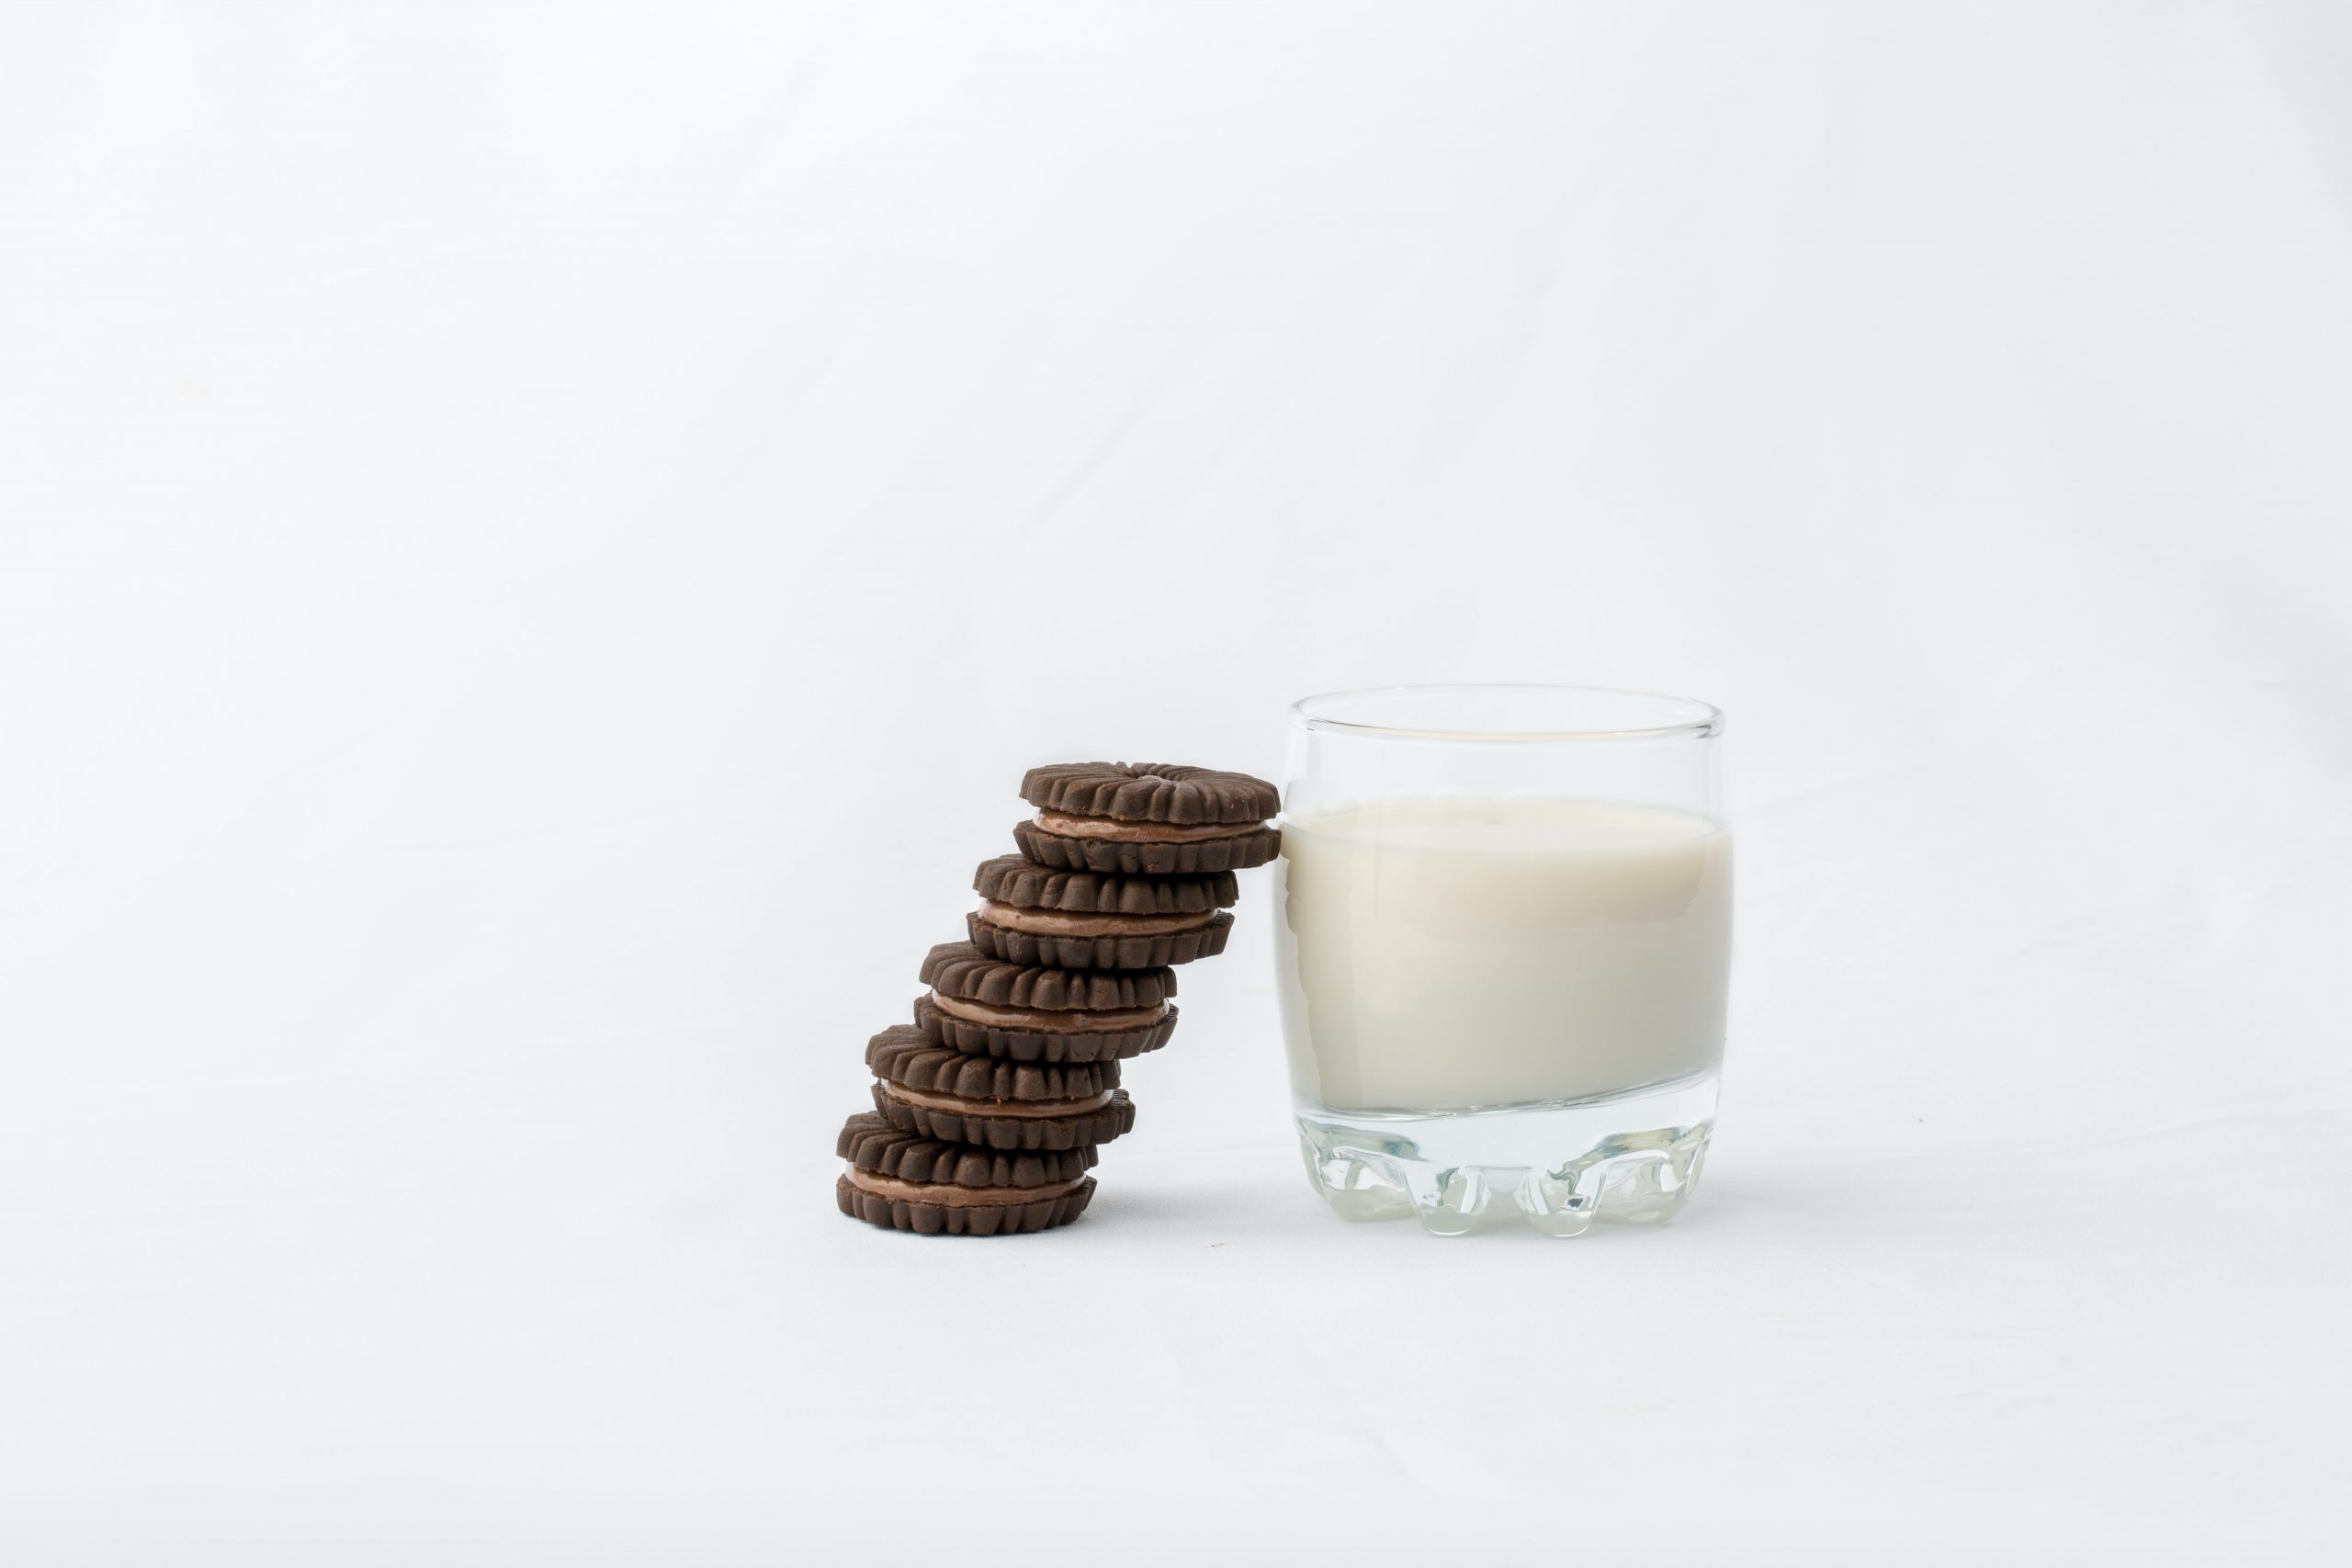 Clear glass cup filled with milk, there are 5 chocolate cookies leaned against it and the entire background is plain white